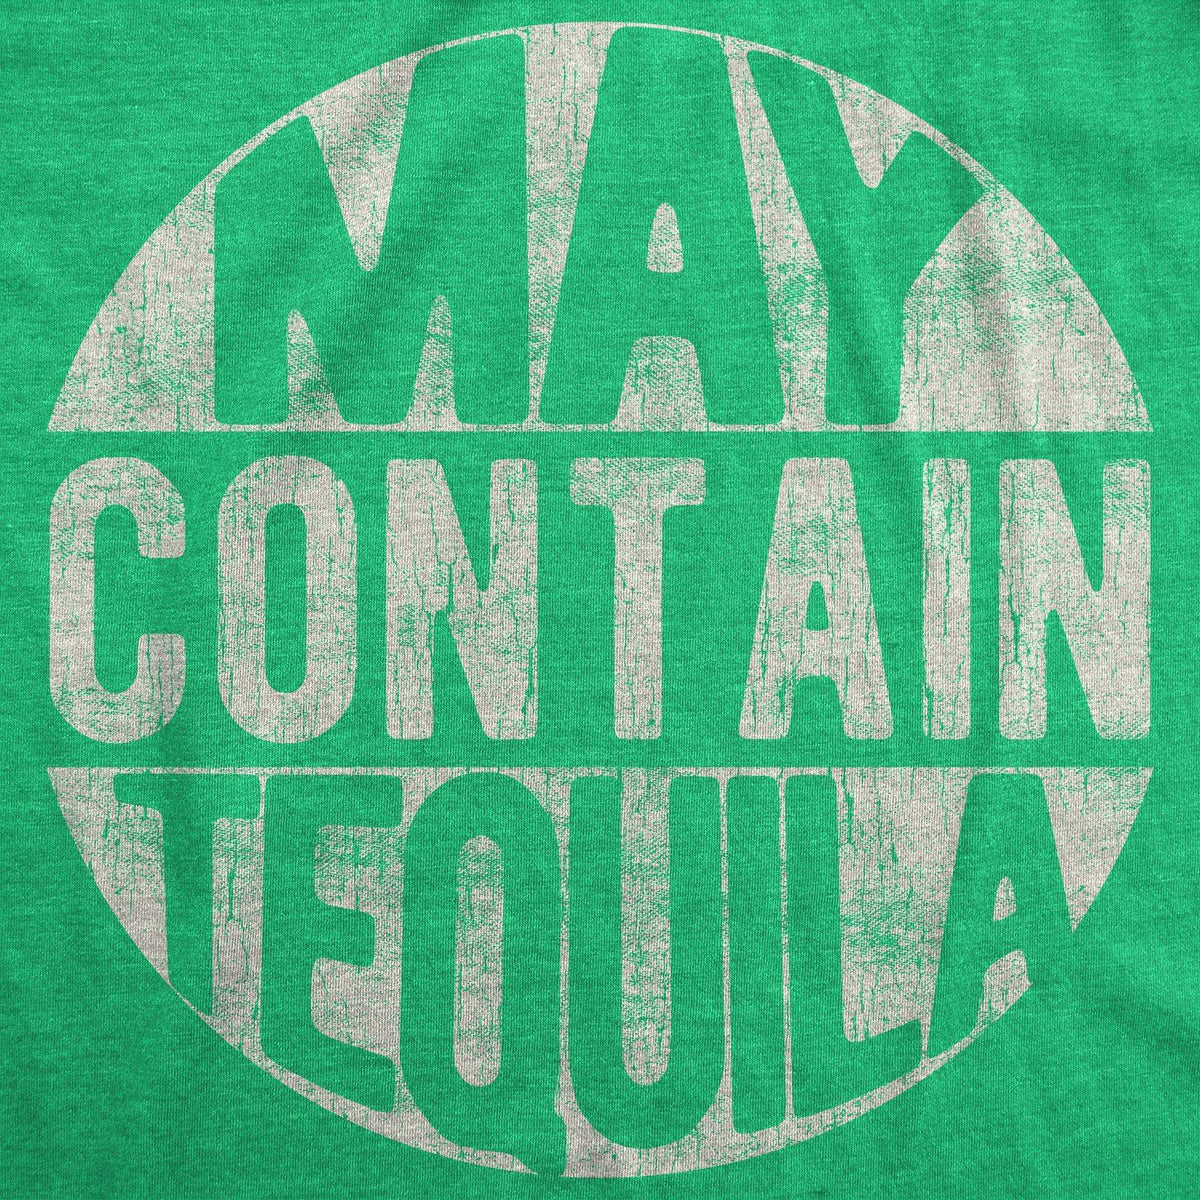 May Contain Tequila Women&#39;s Tshirt - Crazy Dog T-Shirts